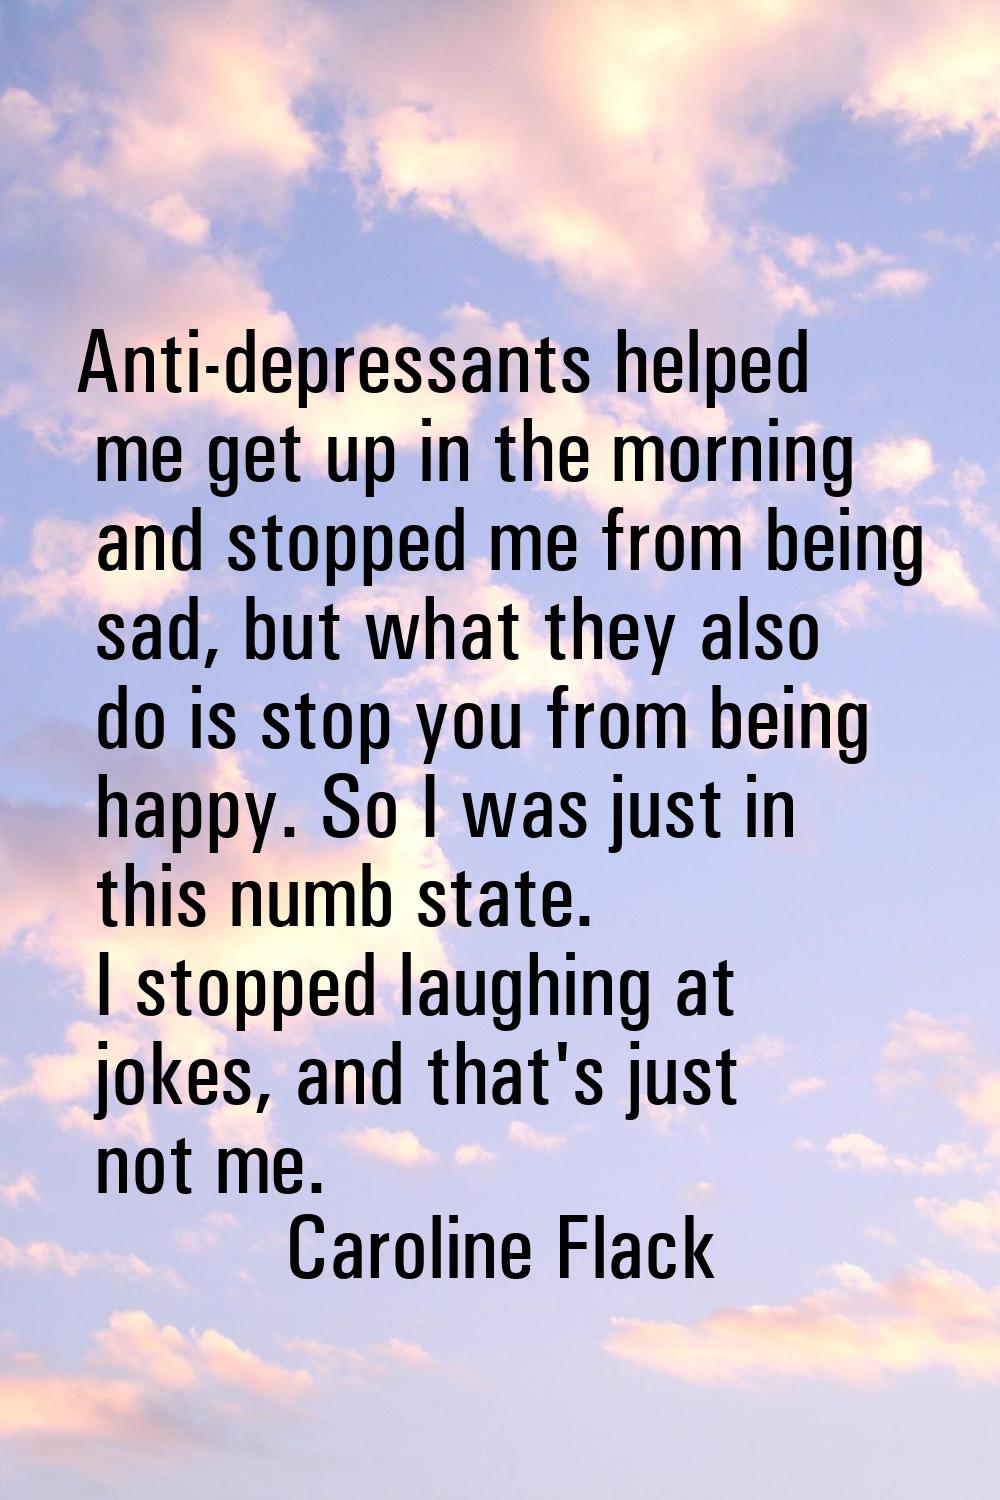 Anti-depressants helped me get up in the morning and stopped me from being sad, but what they also 